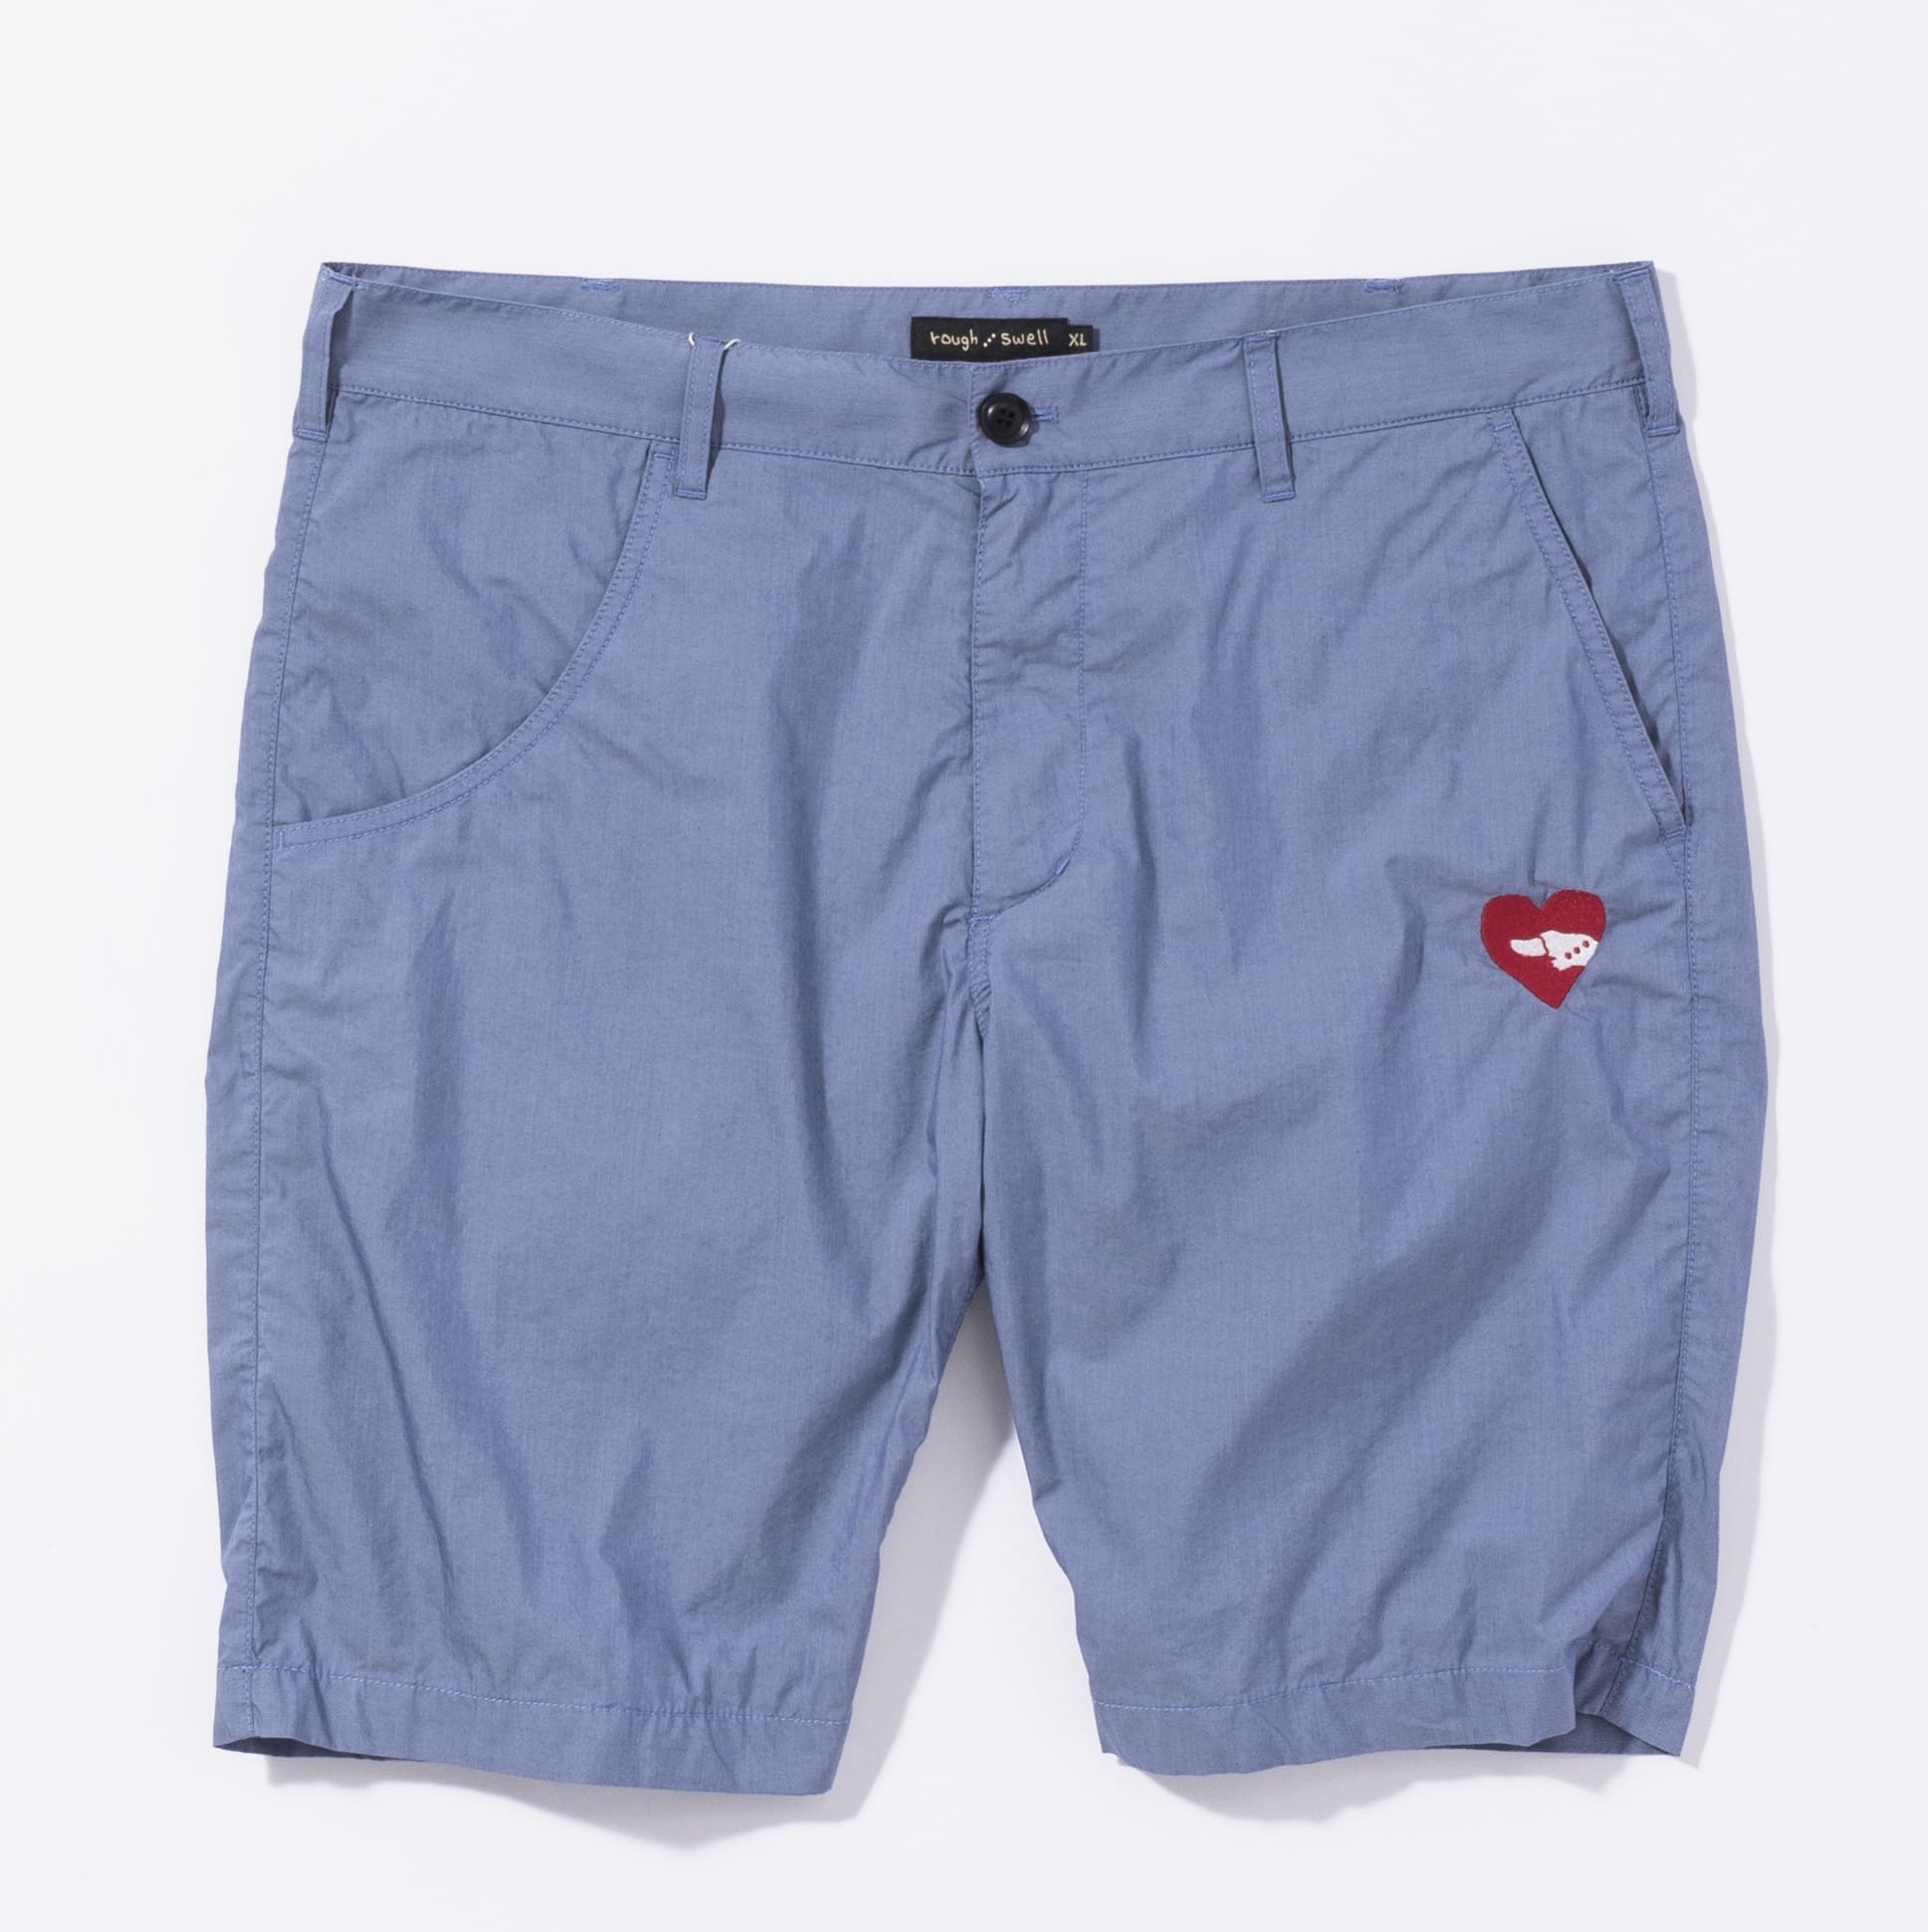 rough & swell DON'T CRY SHORTS ブルー